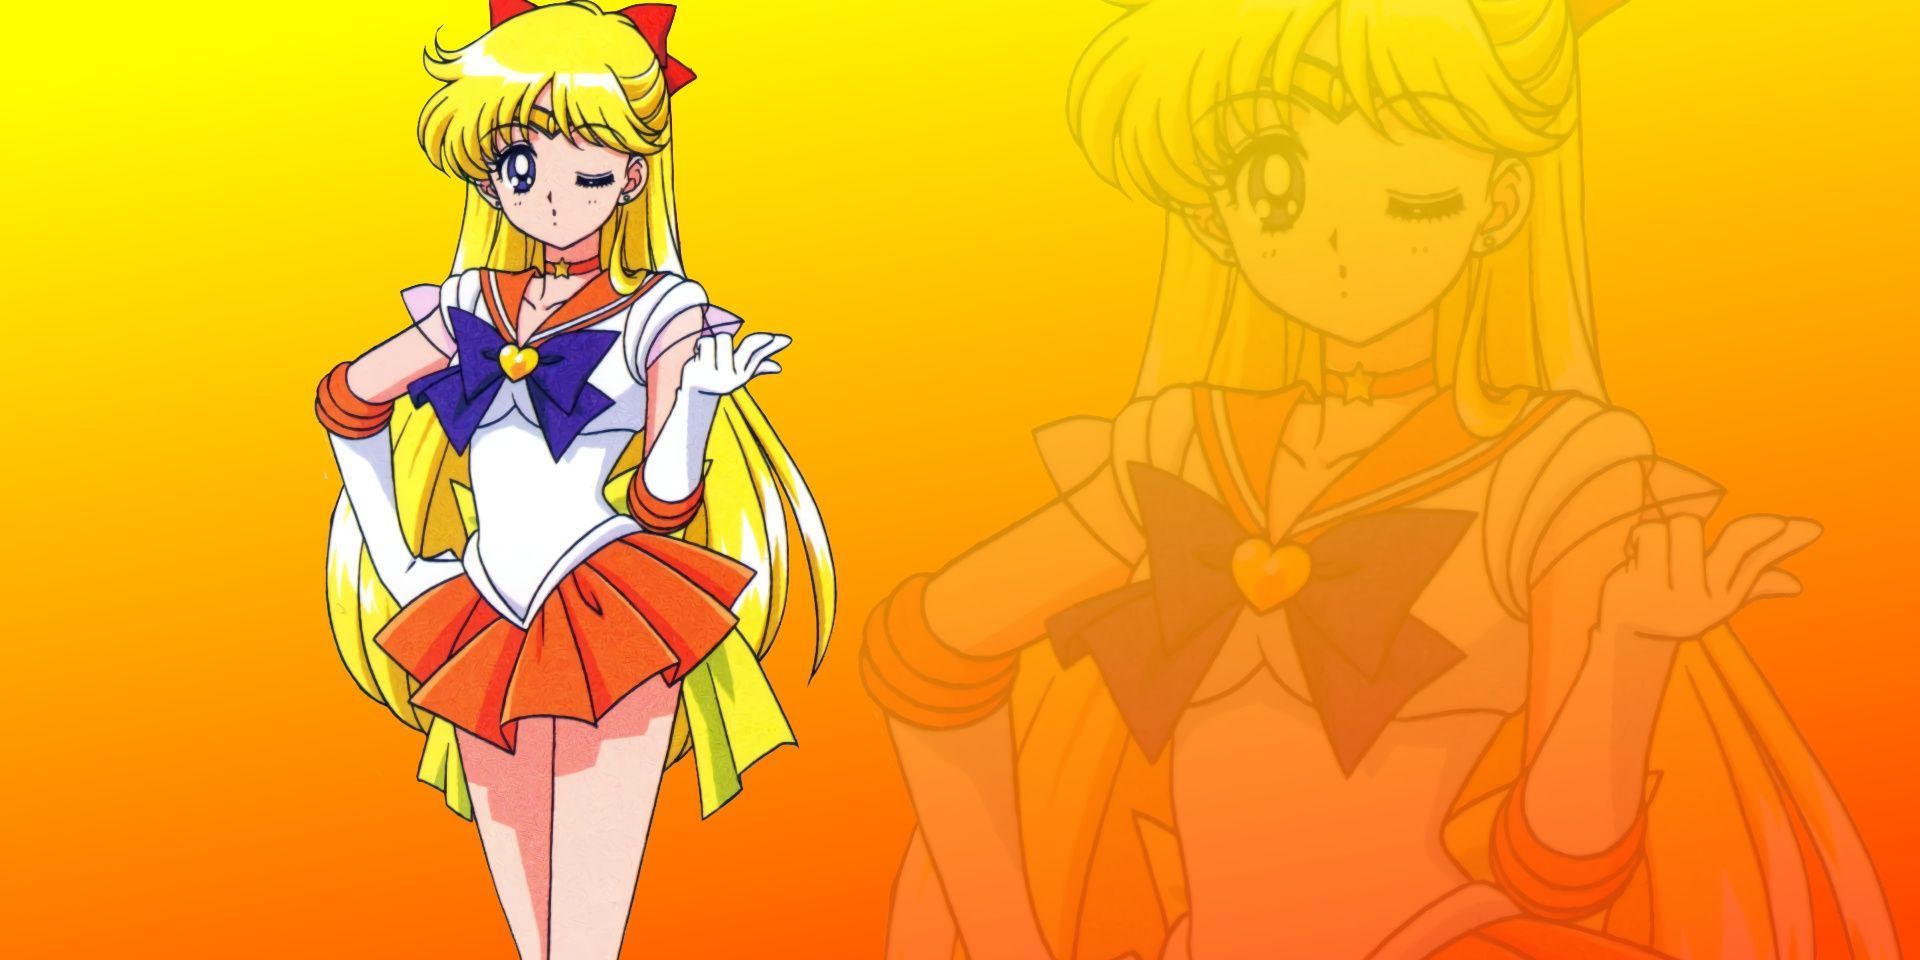 Usagi, the main character of the series, is a typical shōjo protagonist. - Sailor Venus